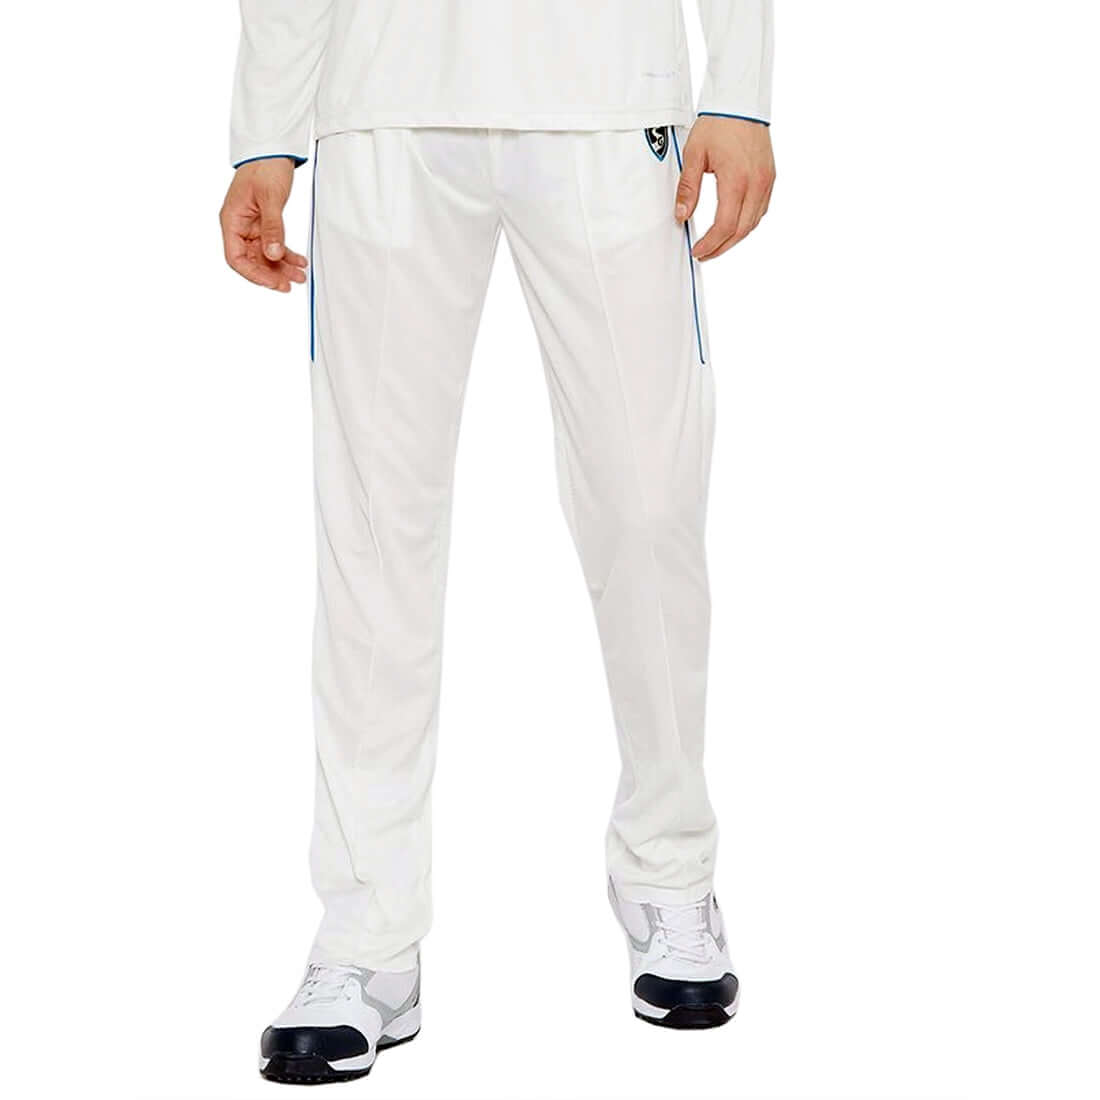 Cotton Polyster blend Cricket Training Trackpants - 111 - ATHLET